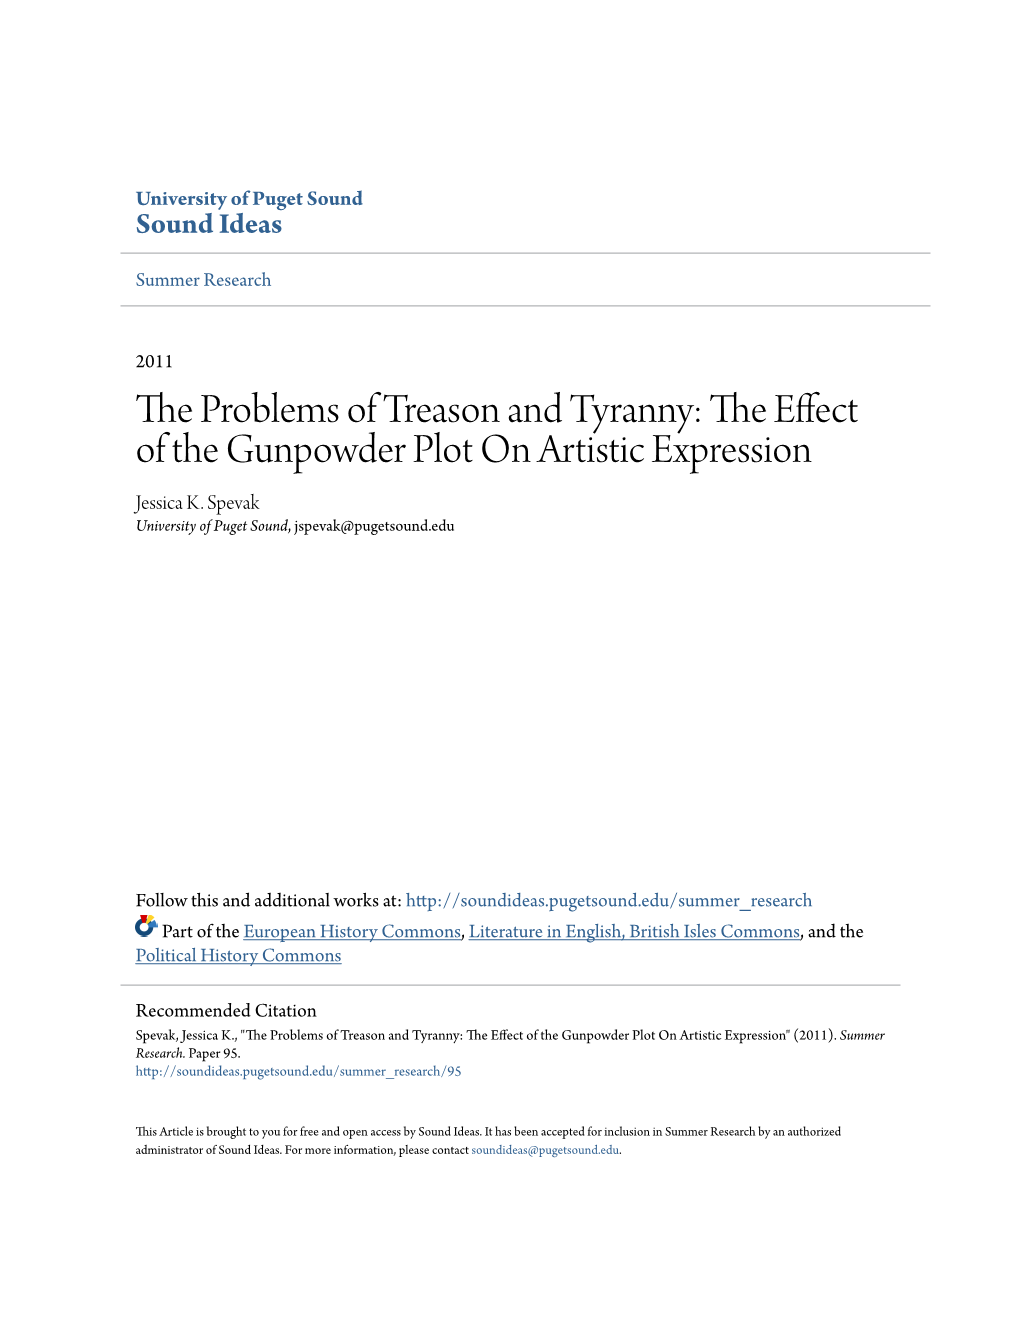 The Effect of the Gunpowder Plot on Artistic Expression" (2011)